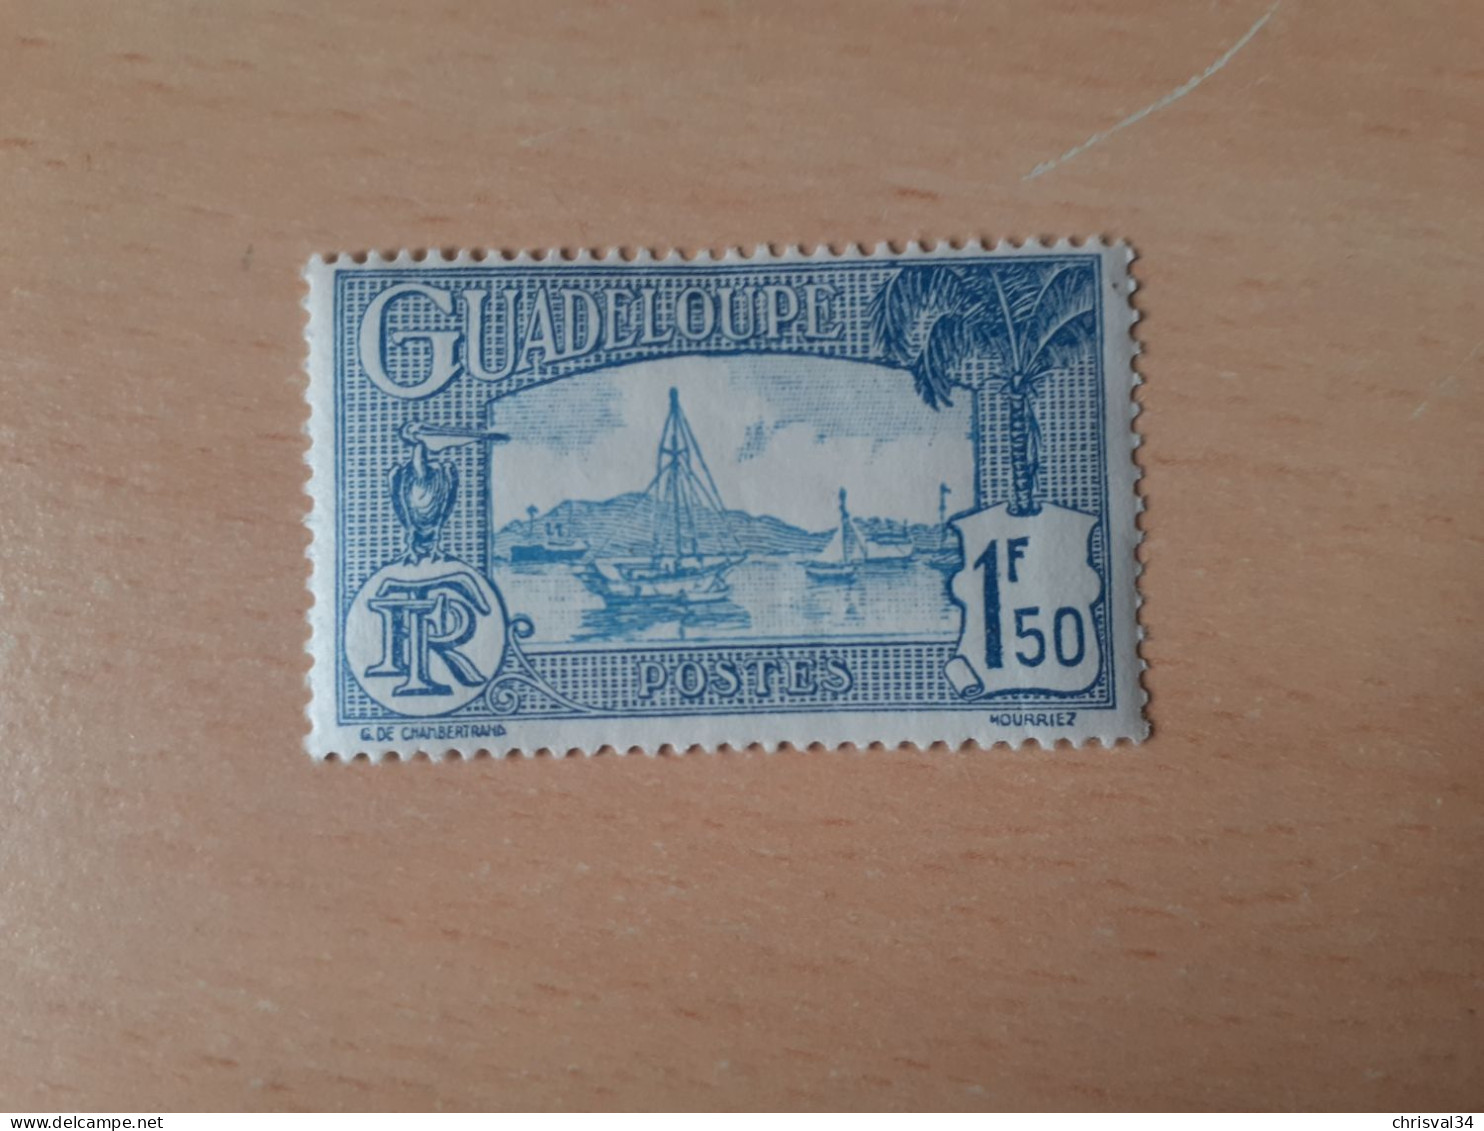 TIMBRE   GUADELOUPE       N  117     COTE  0,50   EUROS  NEUF  TRACE  CHARNIERE - Ungebraucht